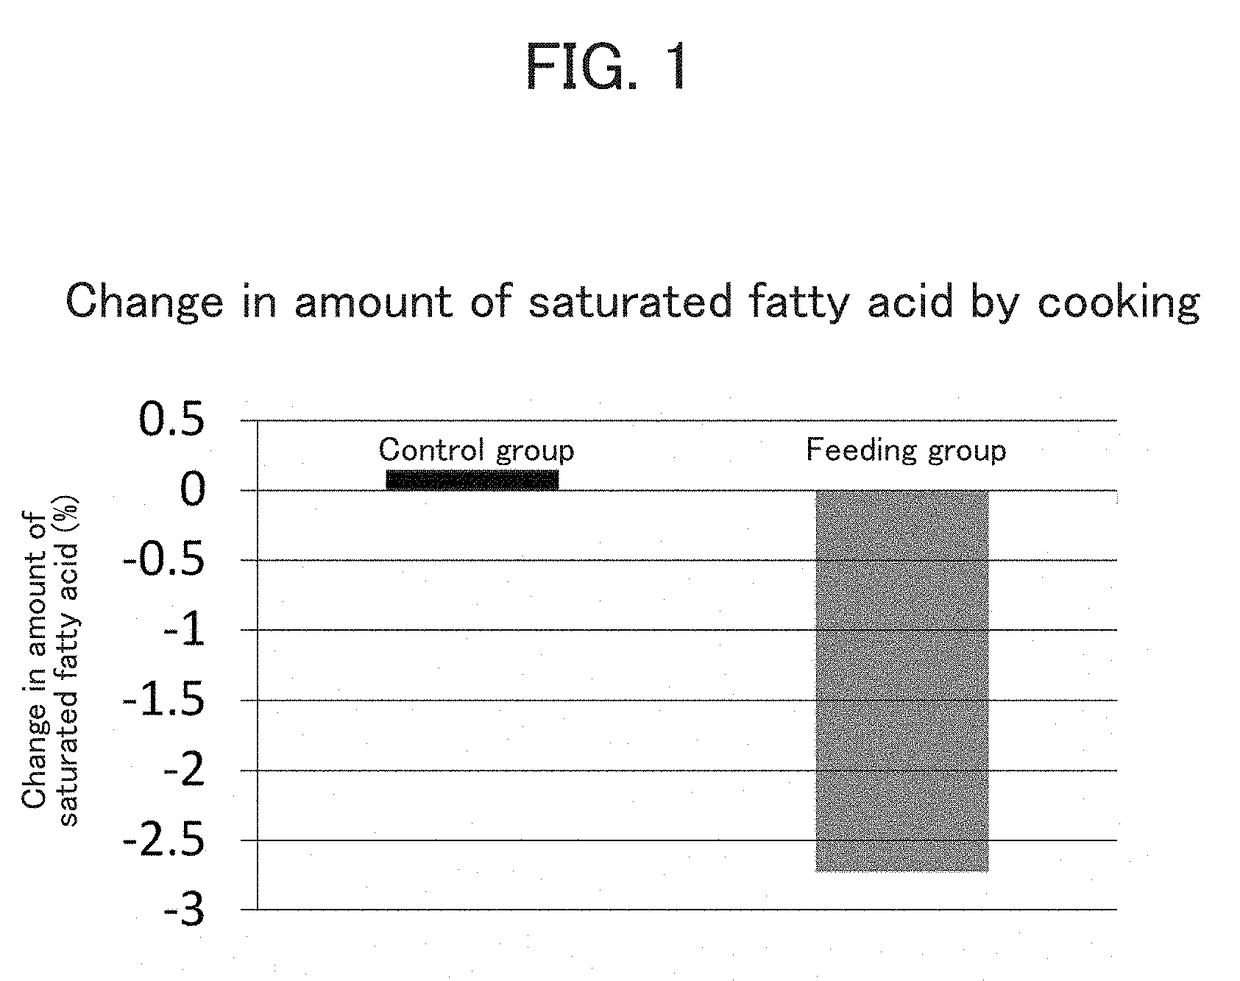 Method for producing meat capable of reducing saturated fatty acid intake